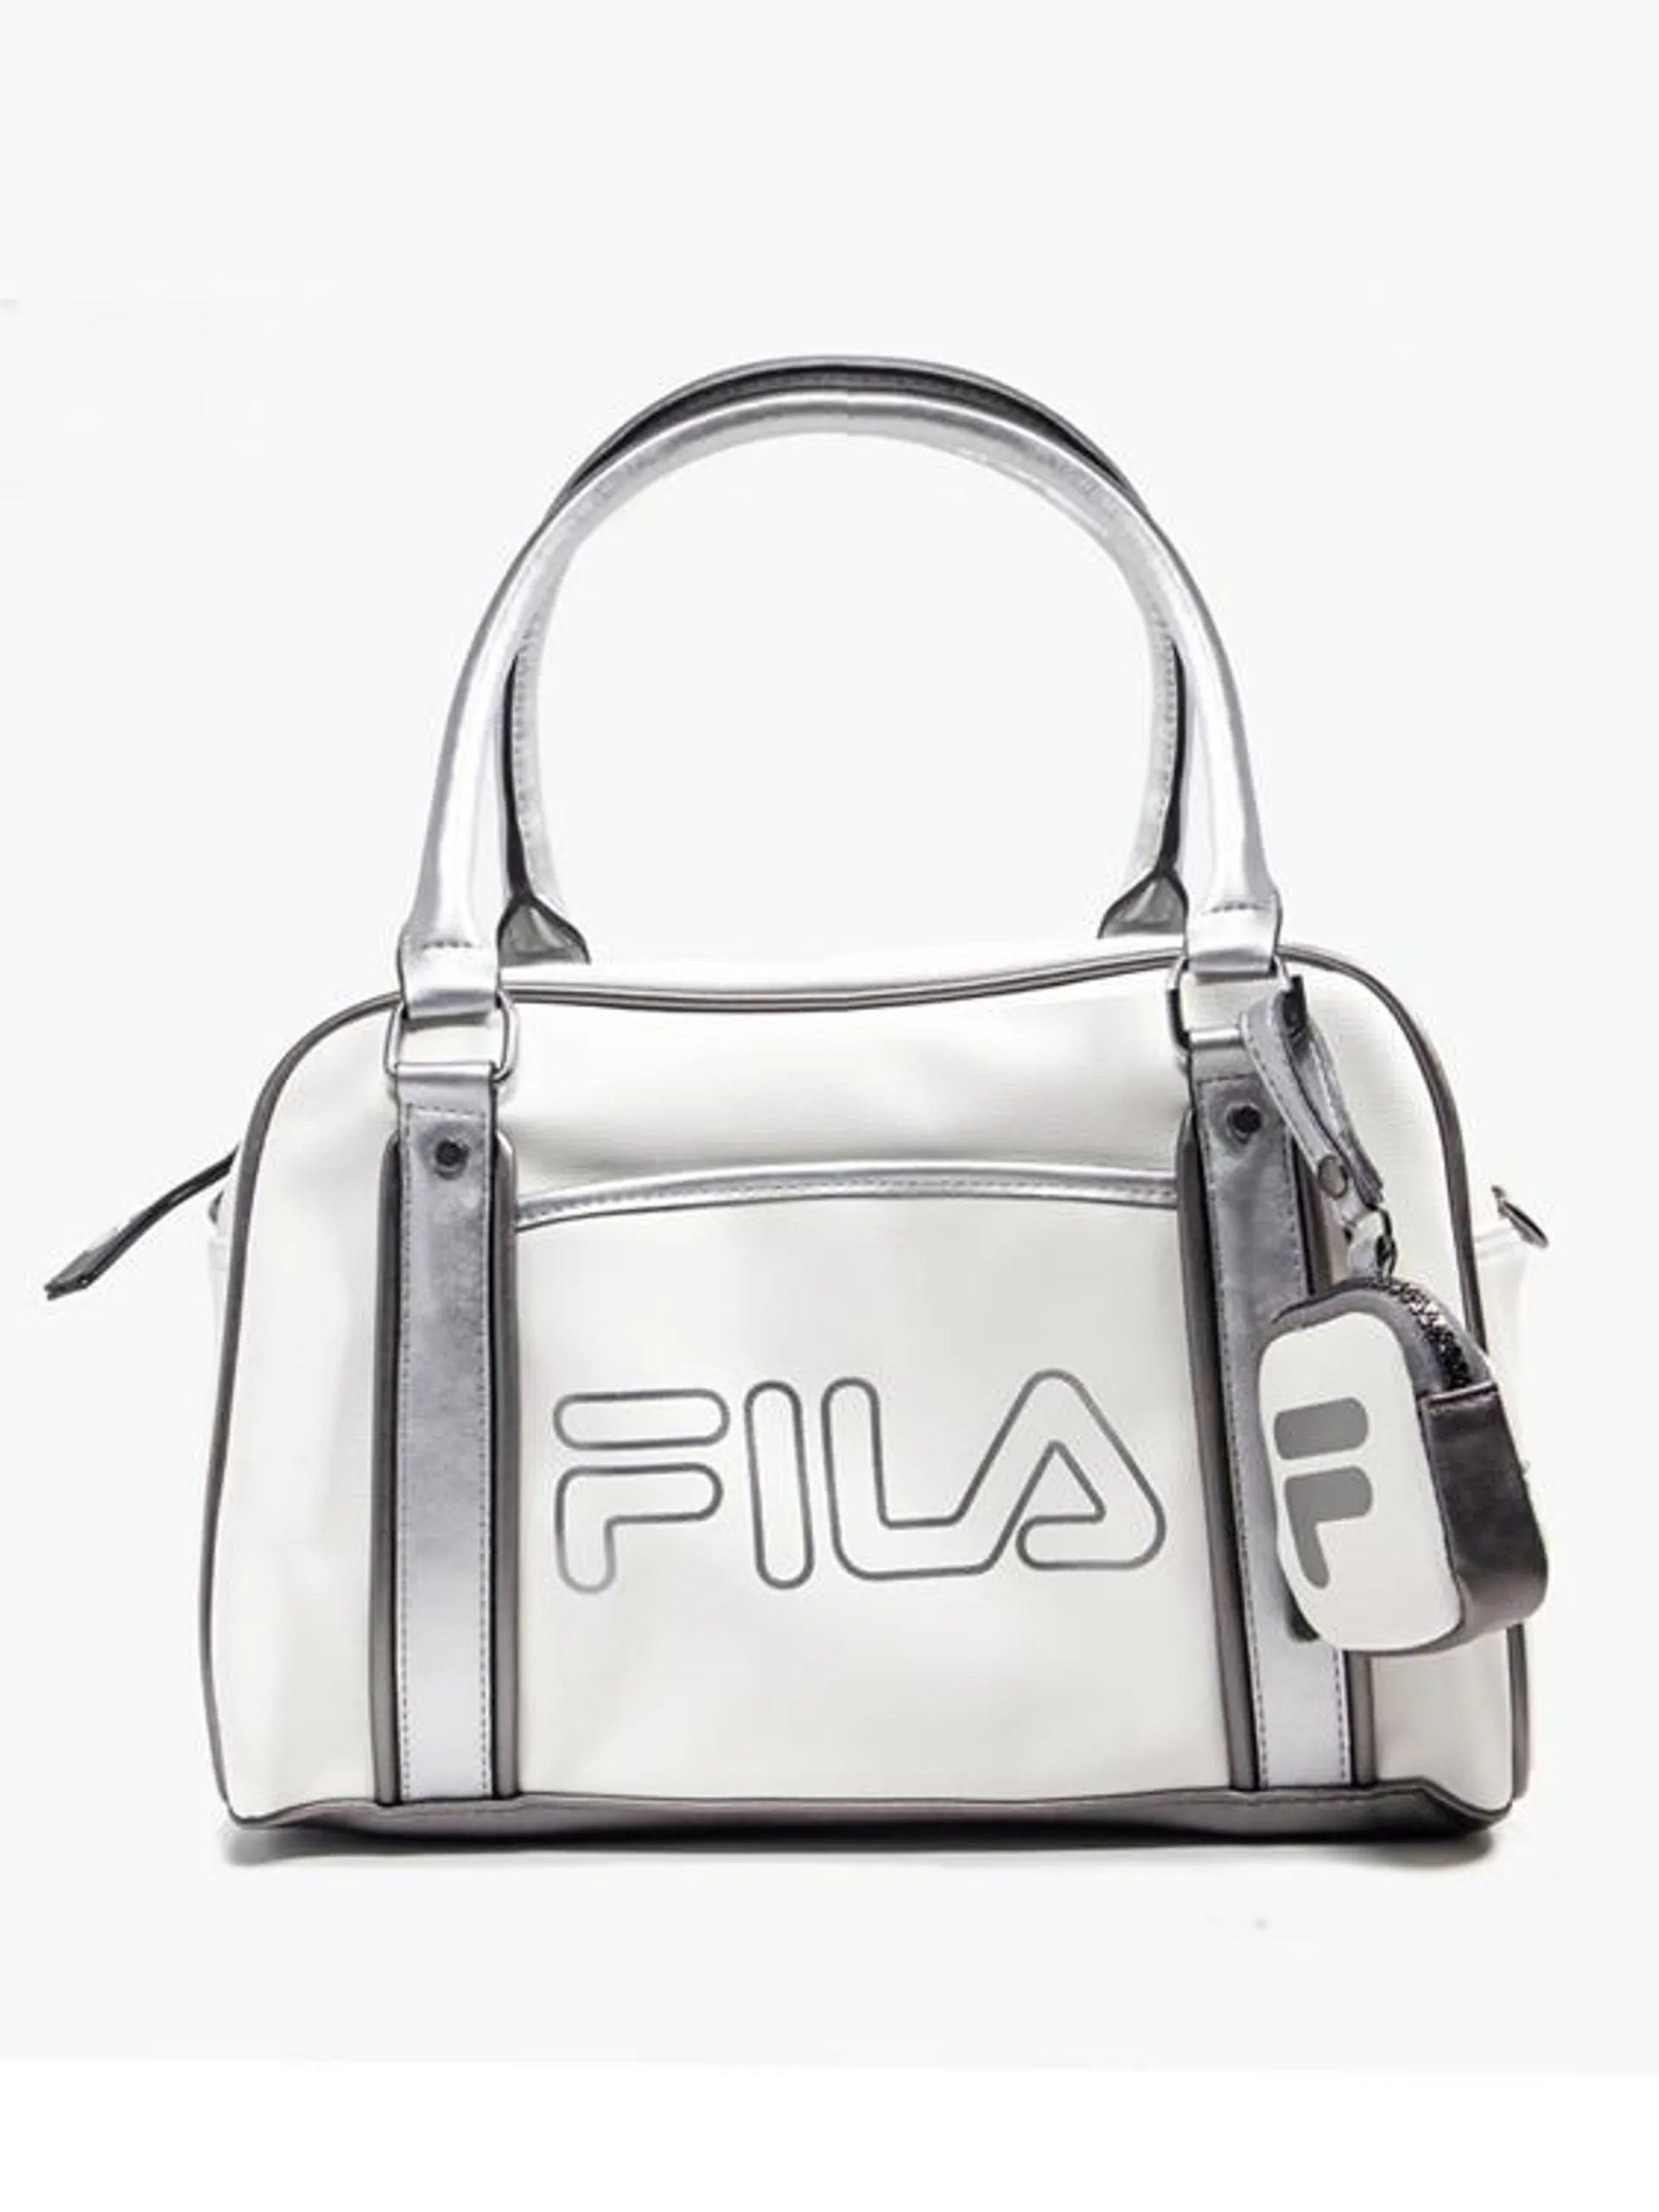 White Fila Bag with Metallic Details and Adjustable Strap